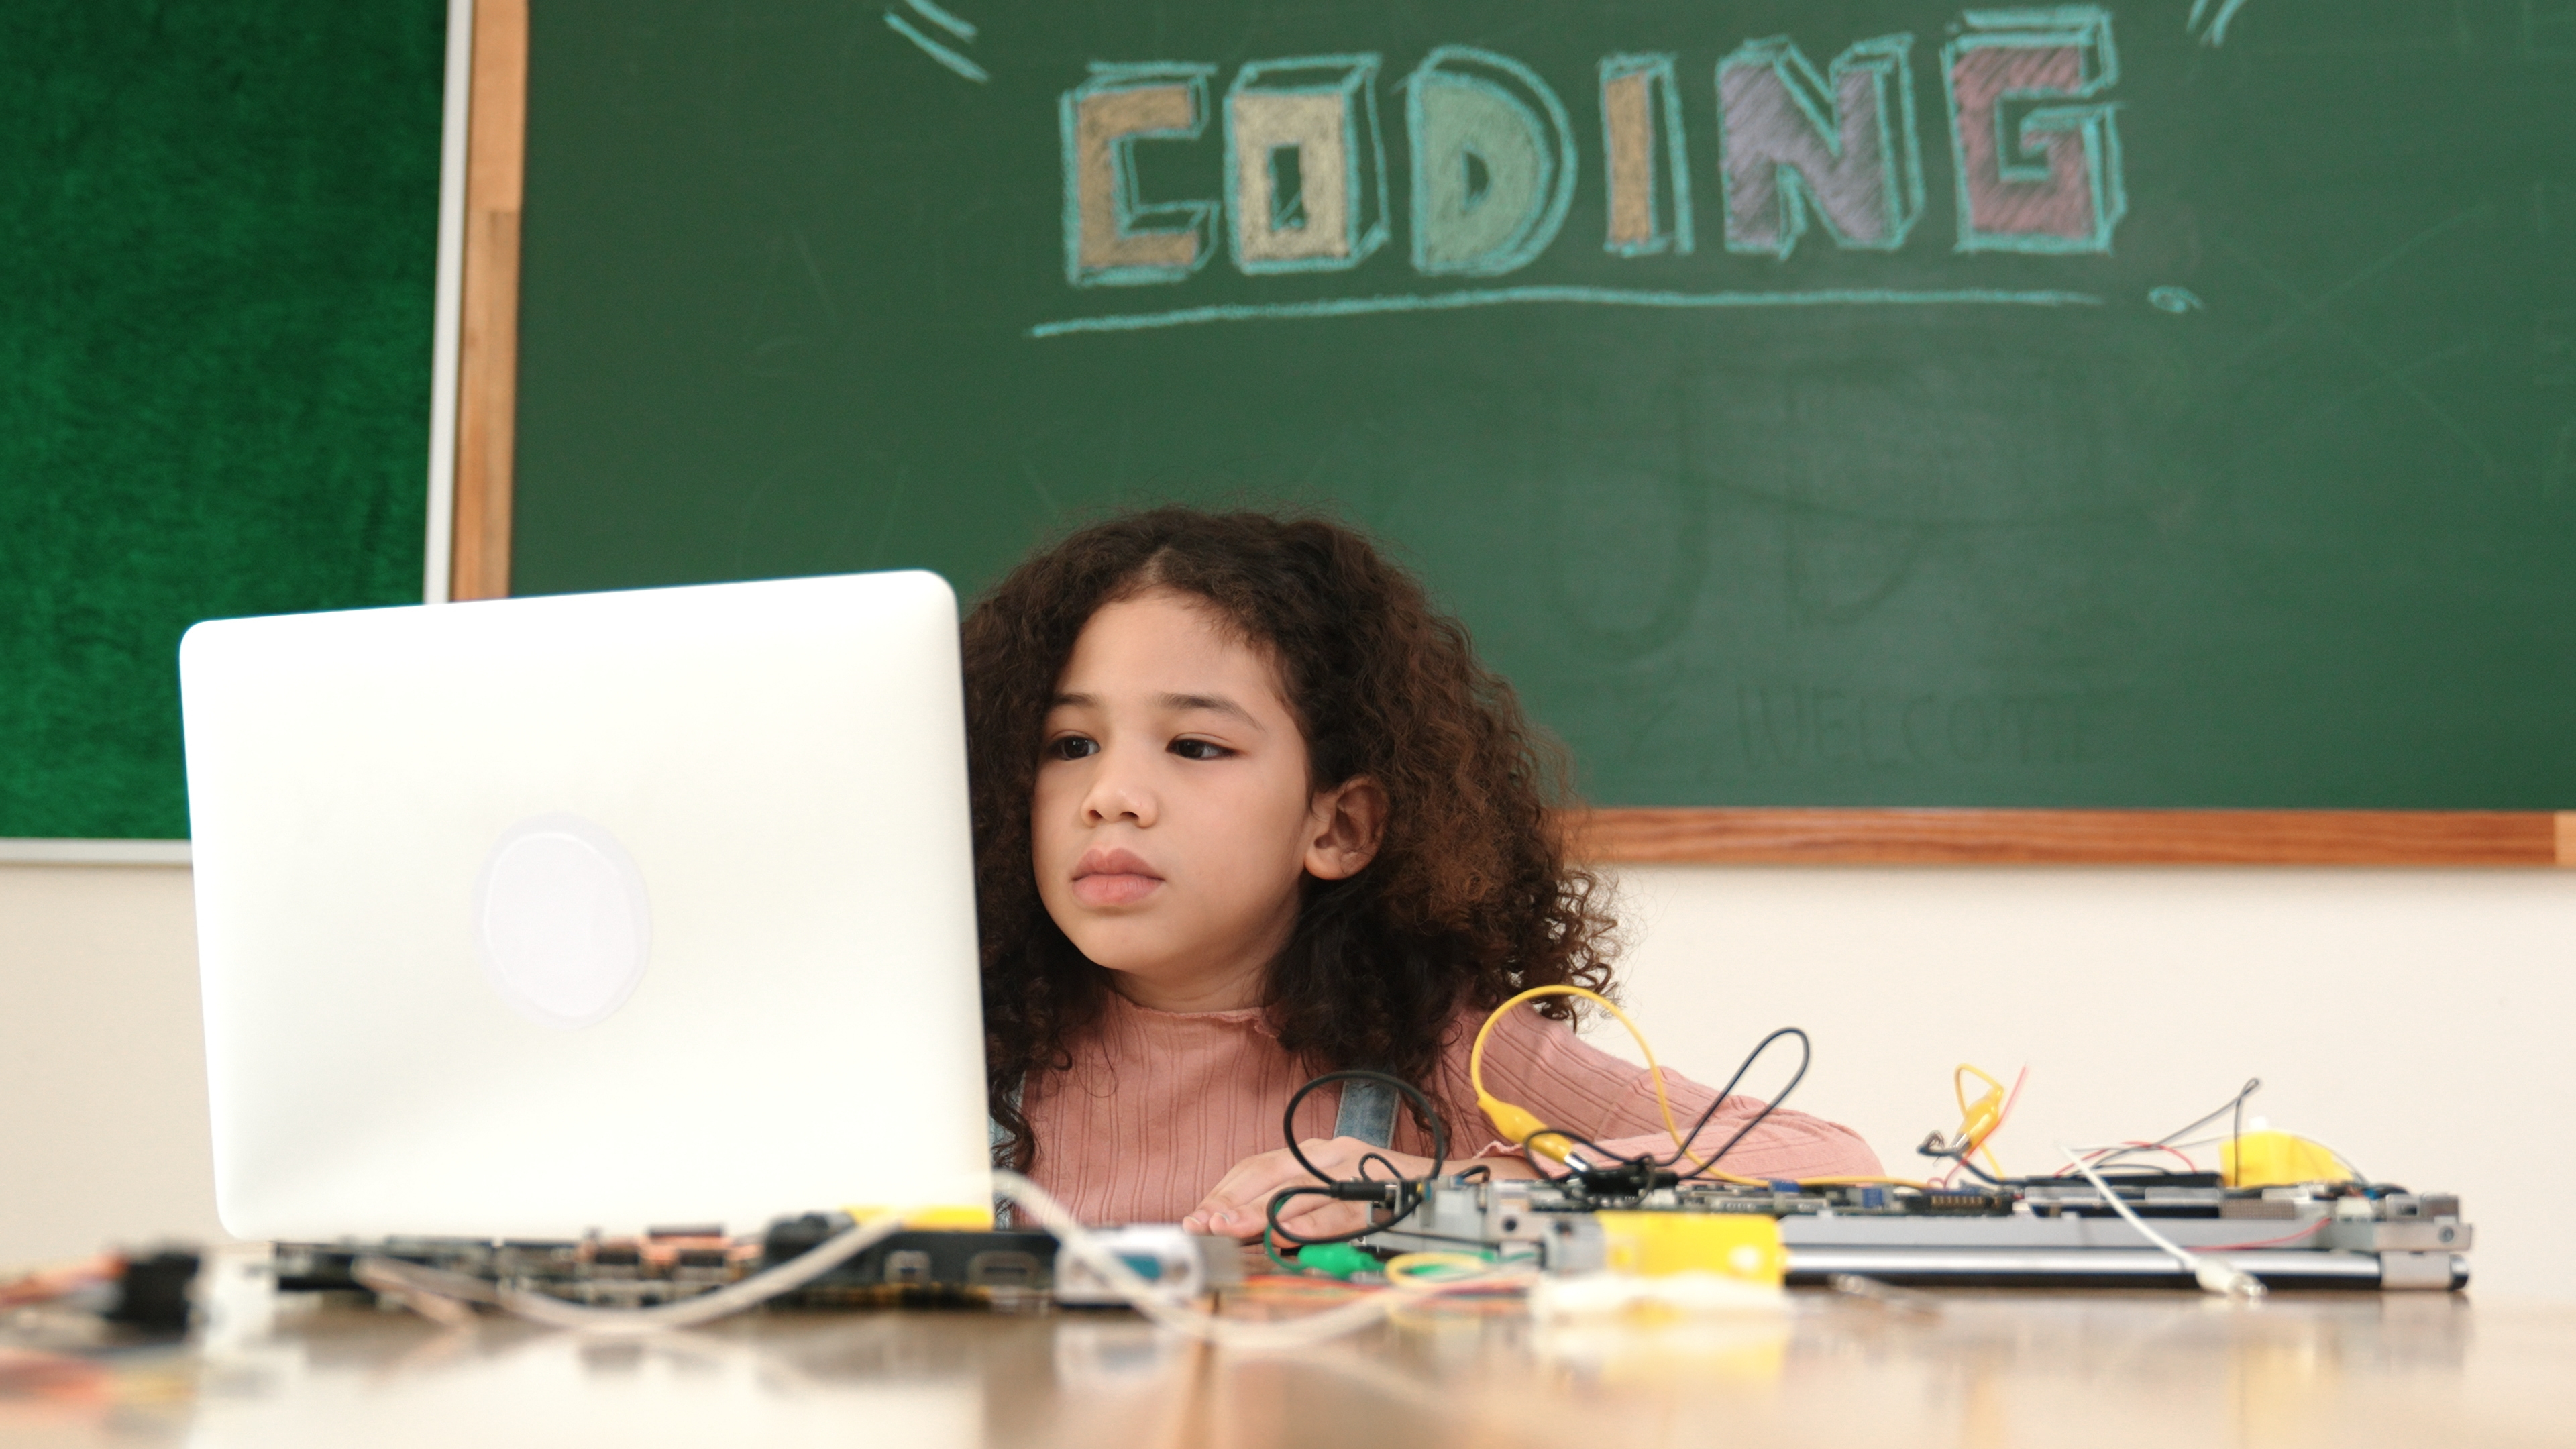 Young girl at a desk with a laptop and electronic components, with &#x27;CODING&#x27; written on the chalkboard behind her